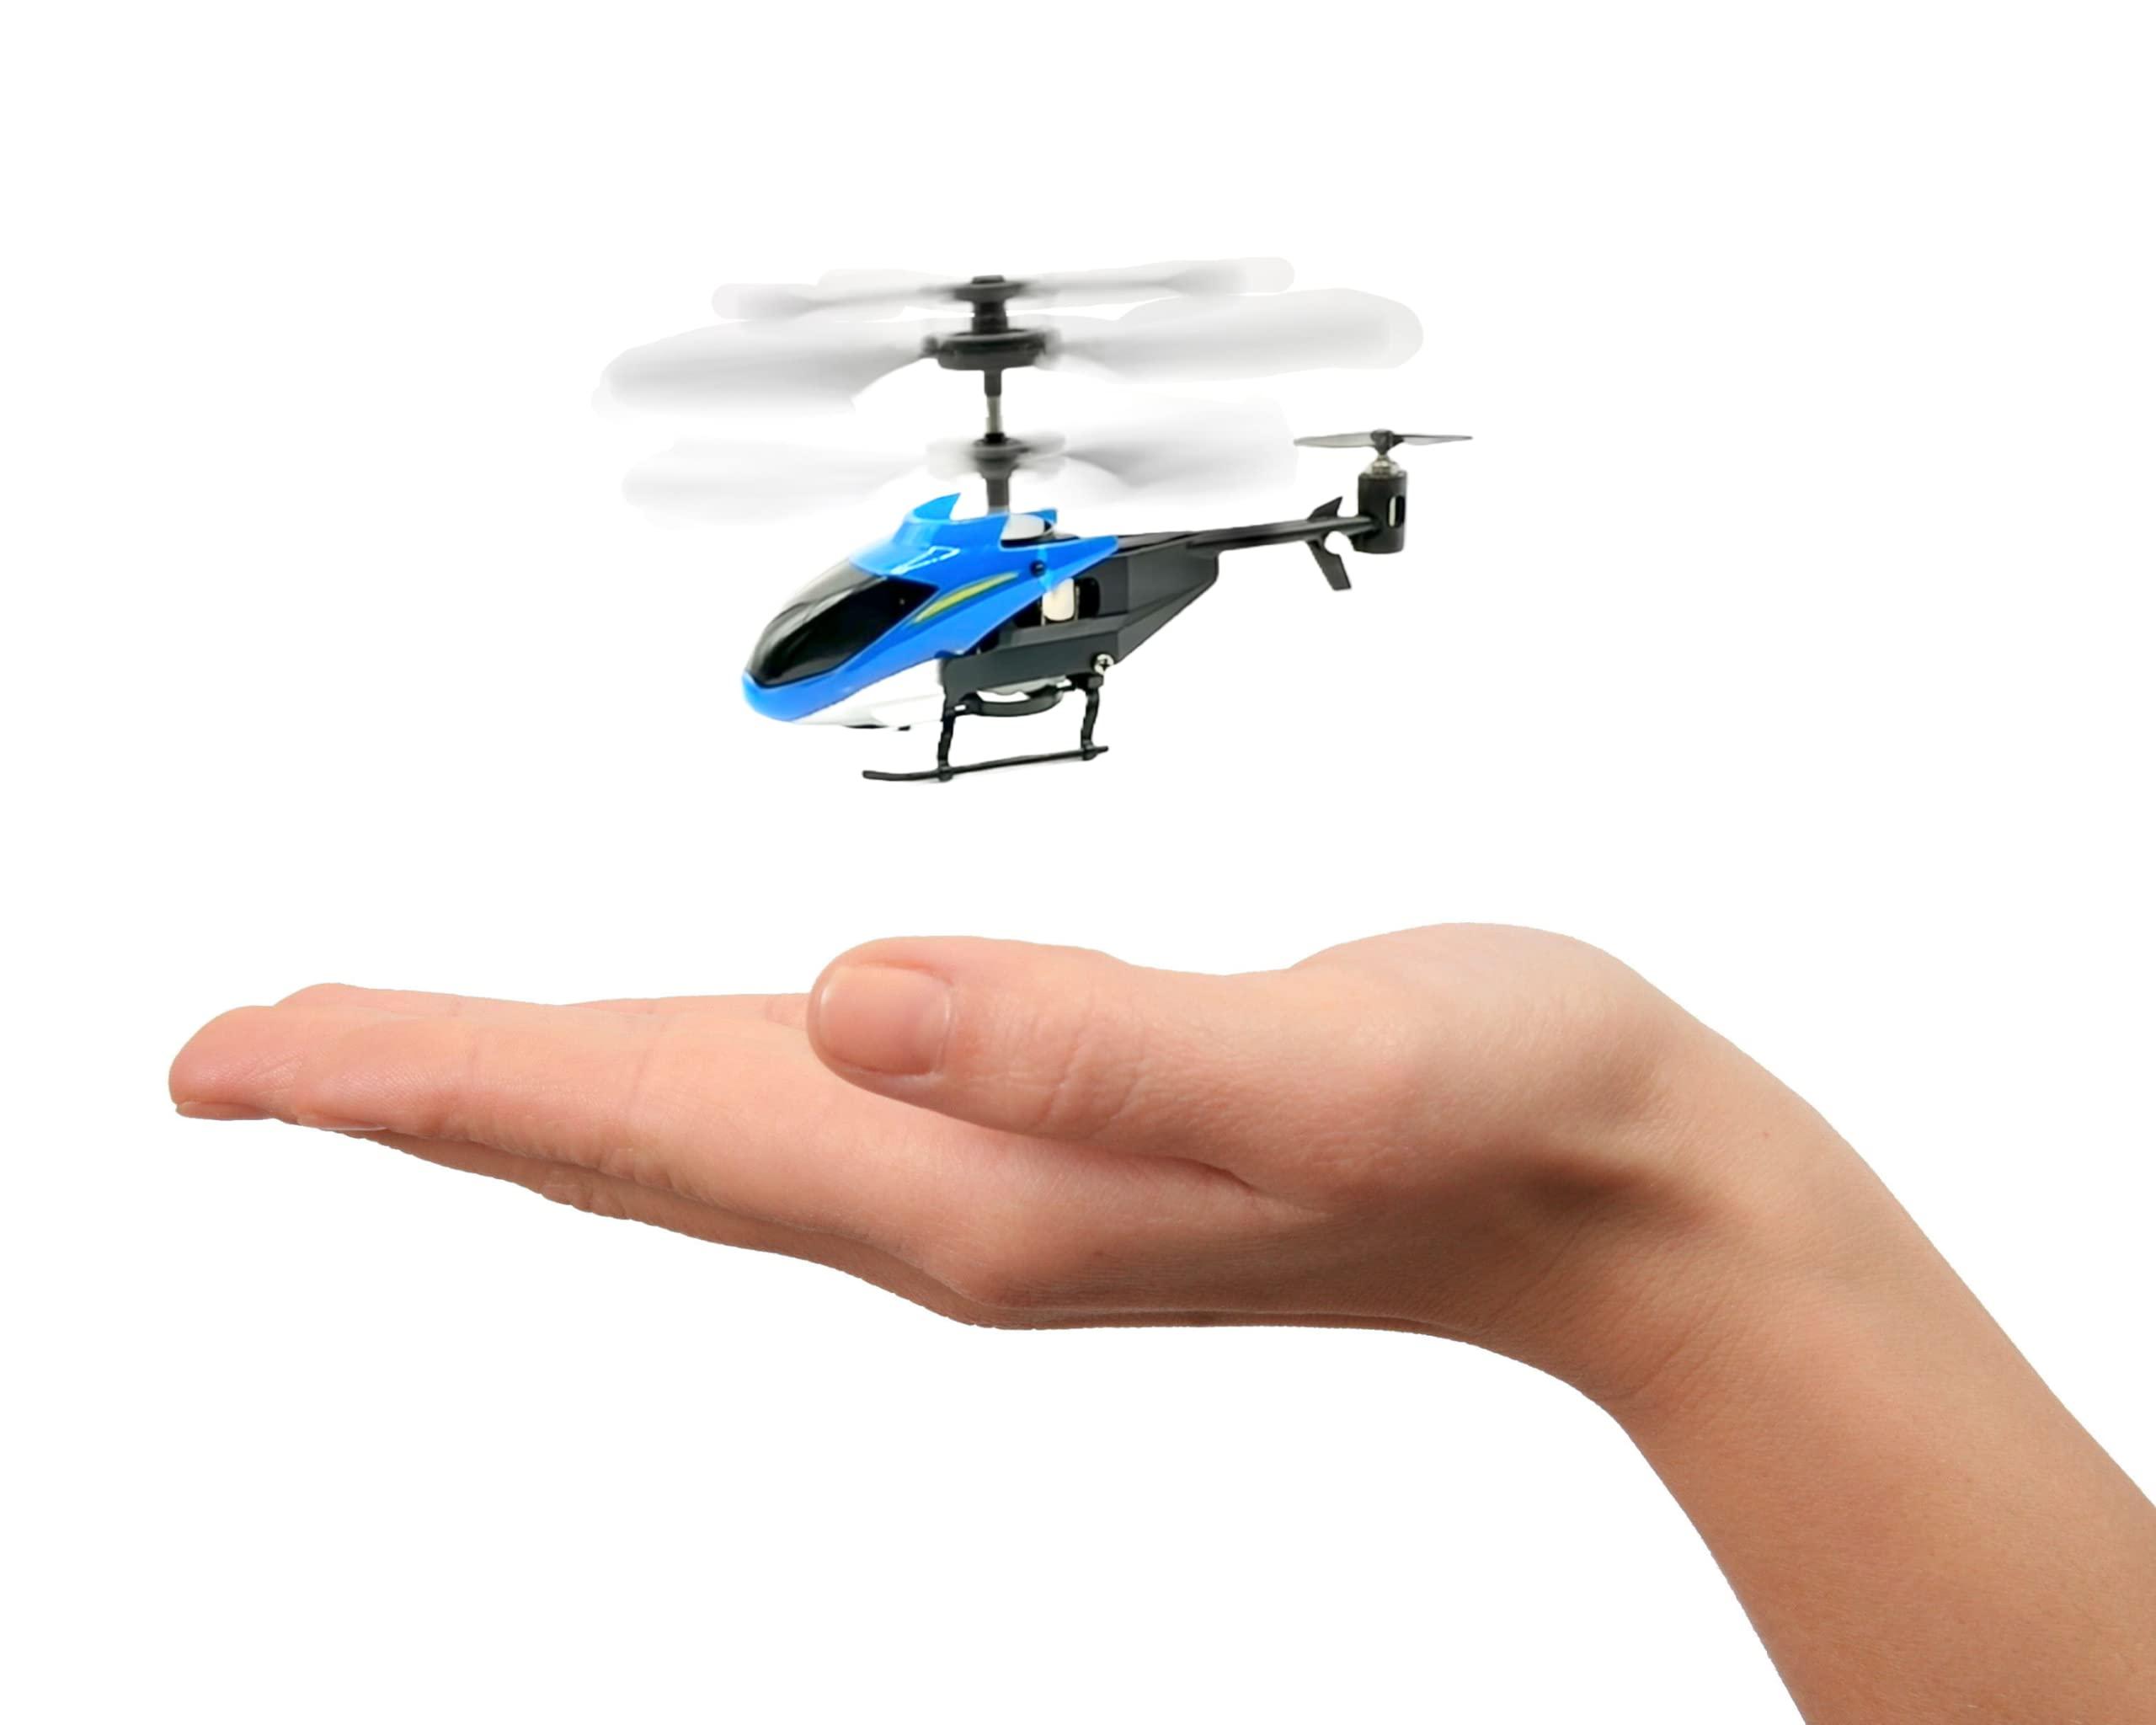 World'S Smallest Remote Control Helicopter: Small but Mighty: The World's Smallest Remote Control Helicopter